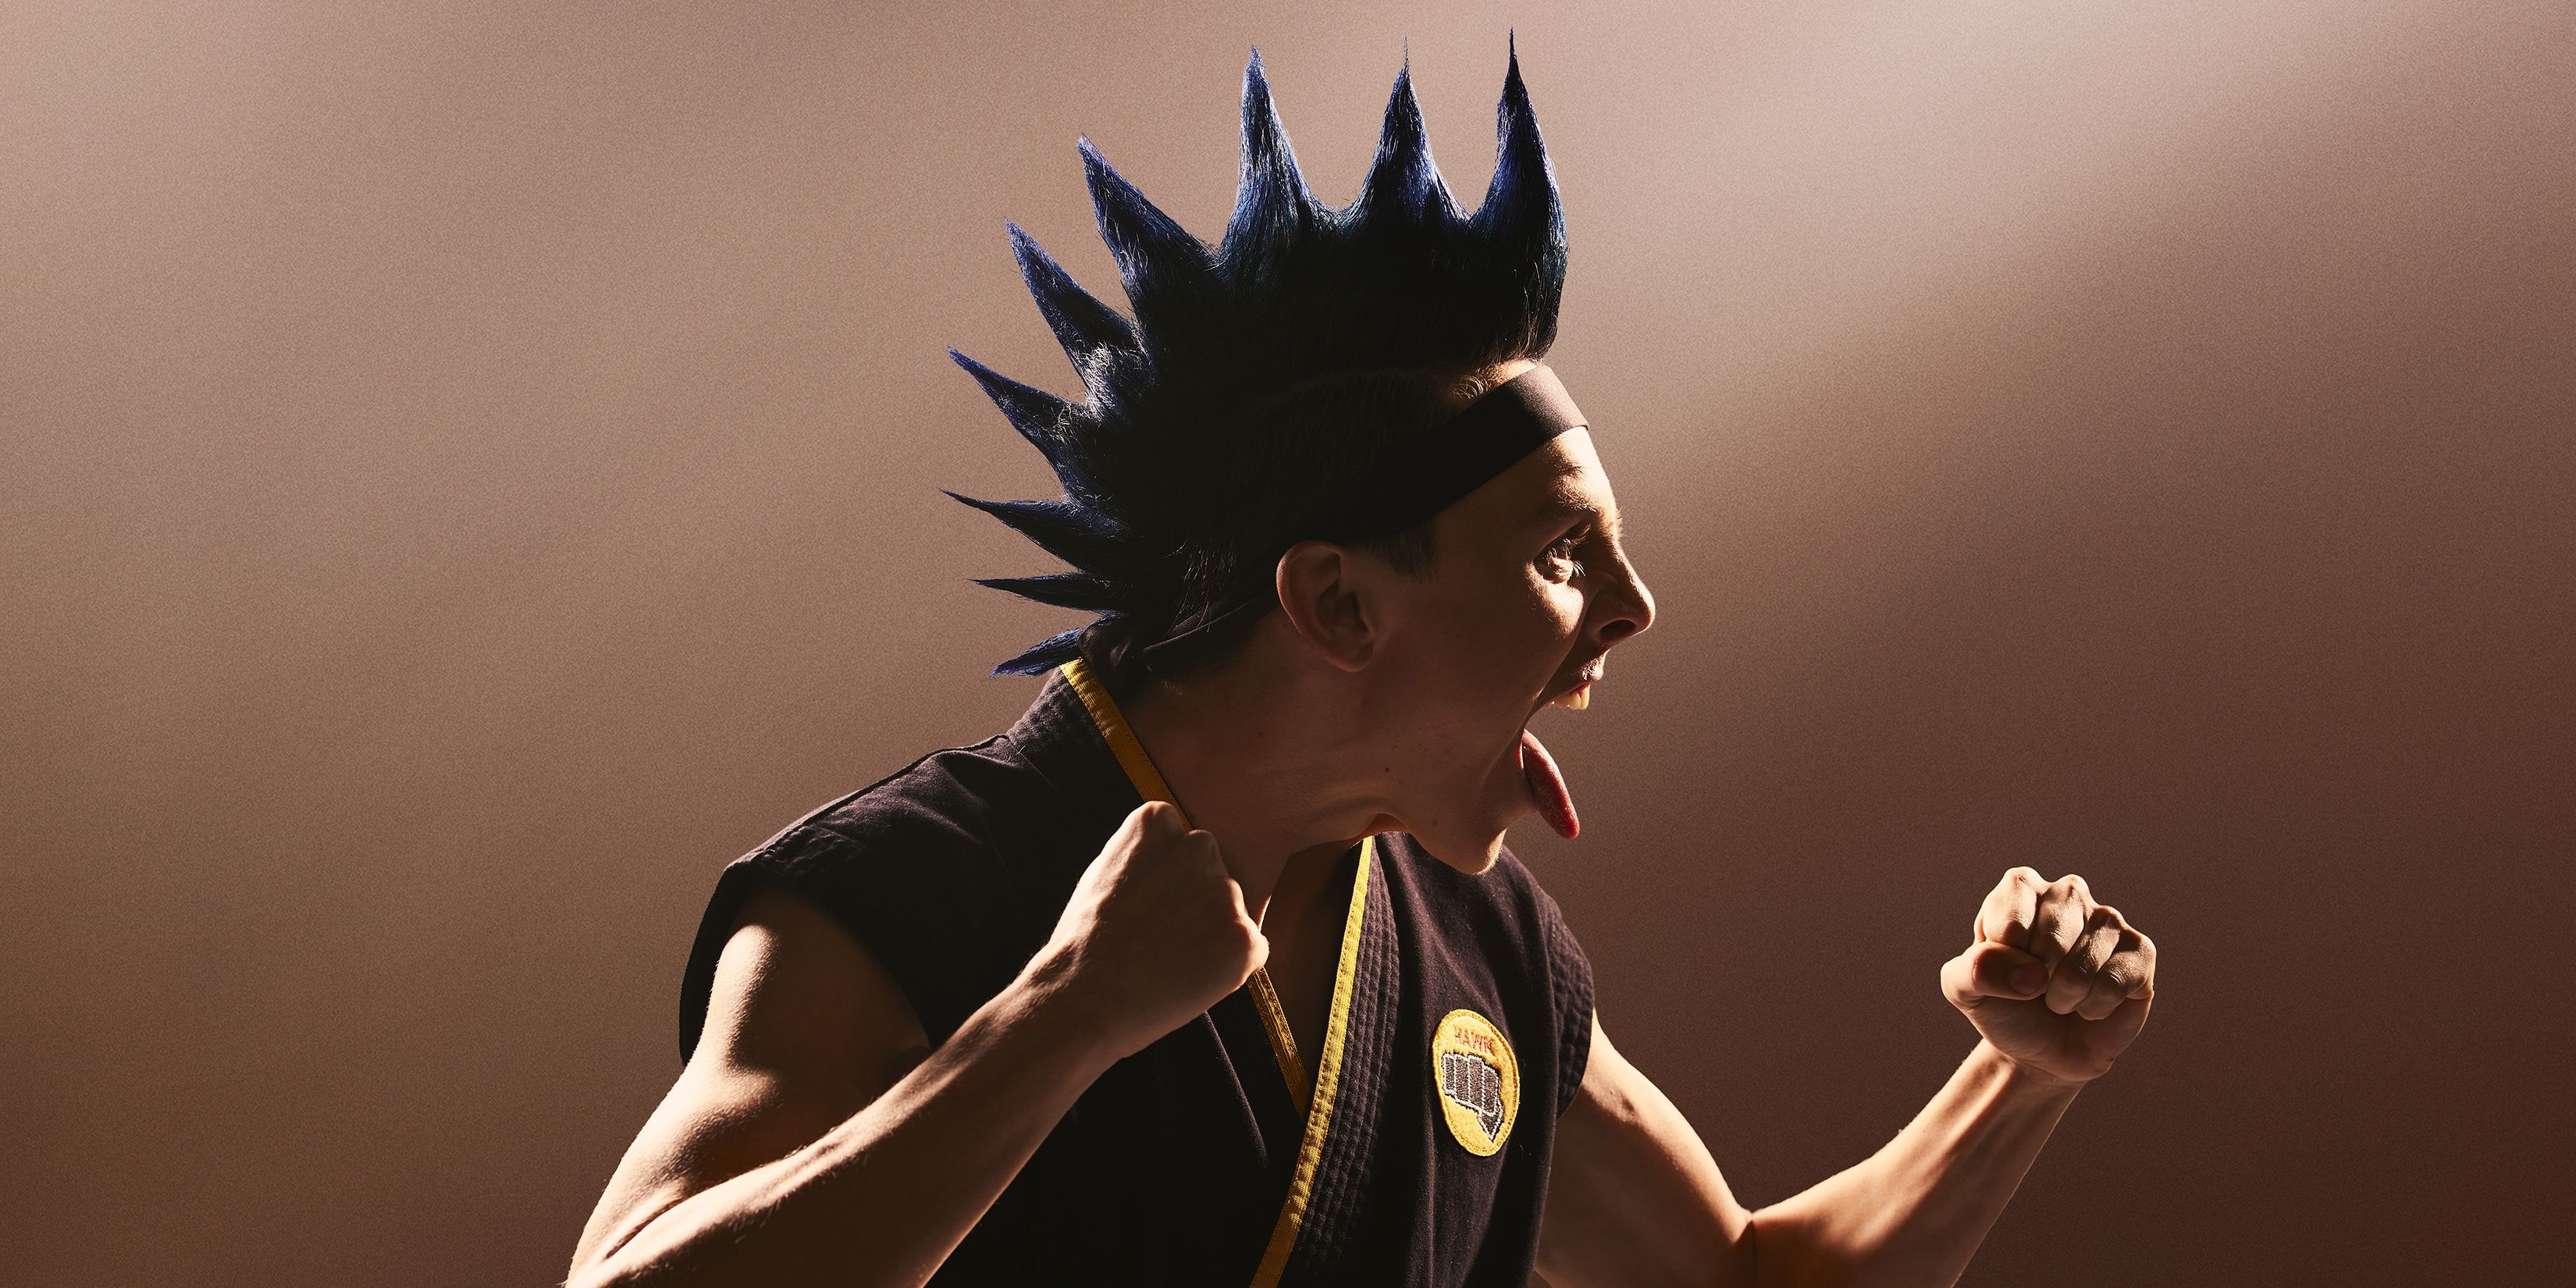 Hawk in a fighting stance in a promotional image from Cobra Kai